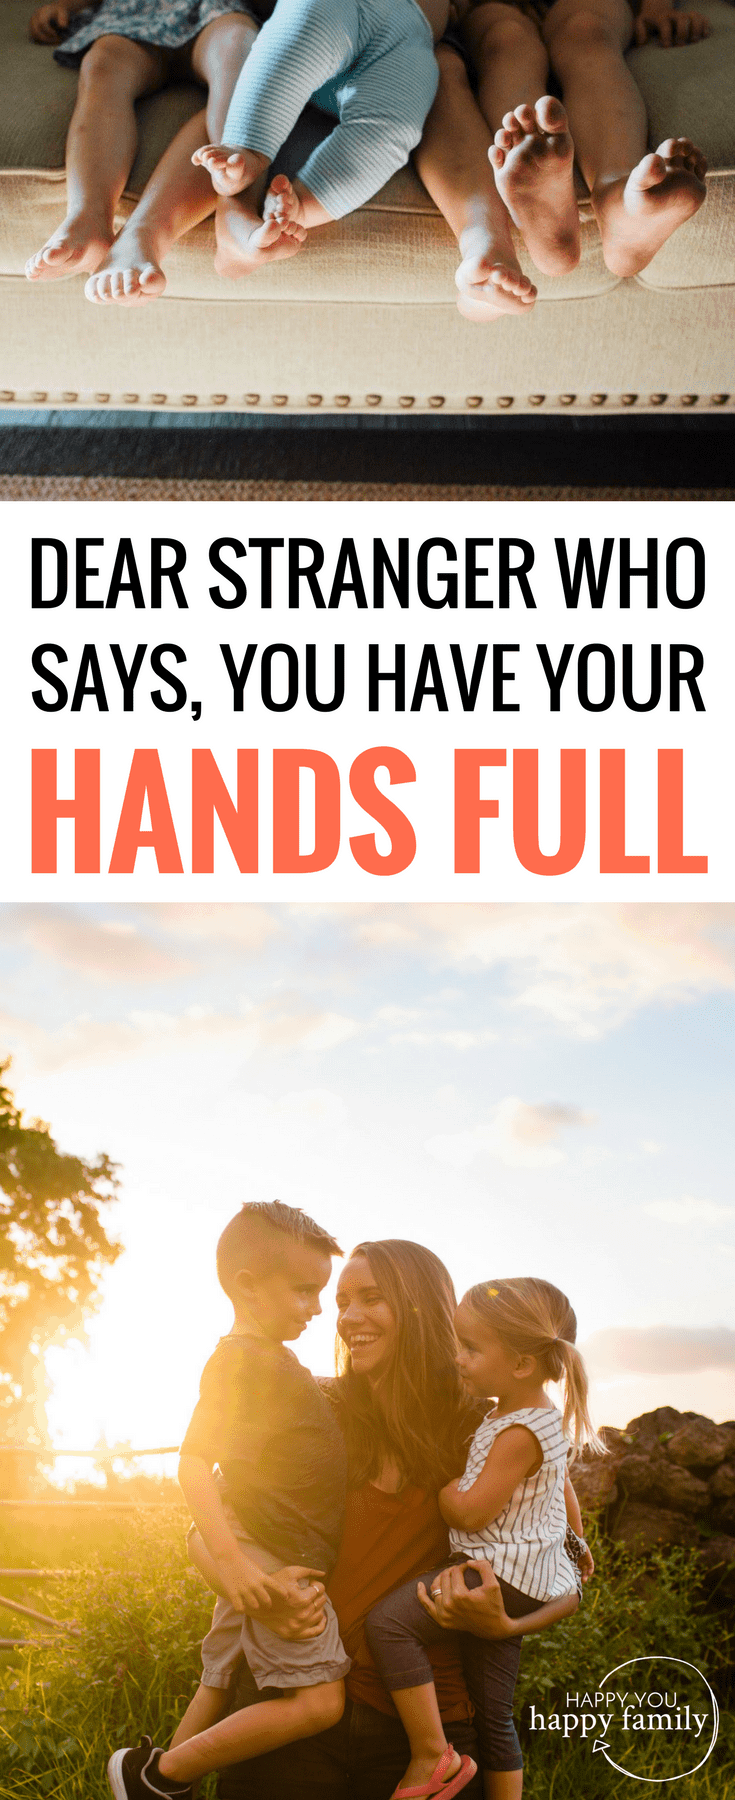 If you think my hands are full